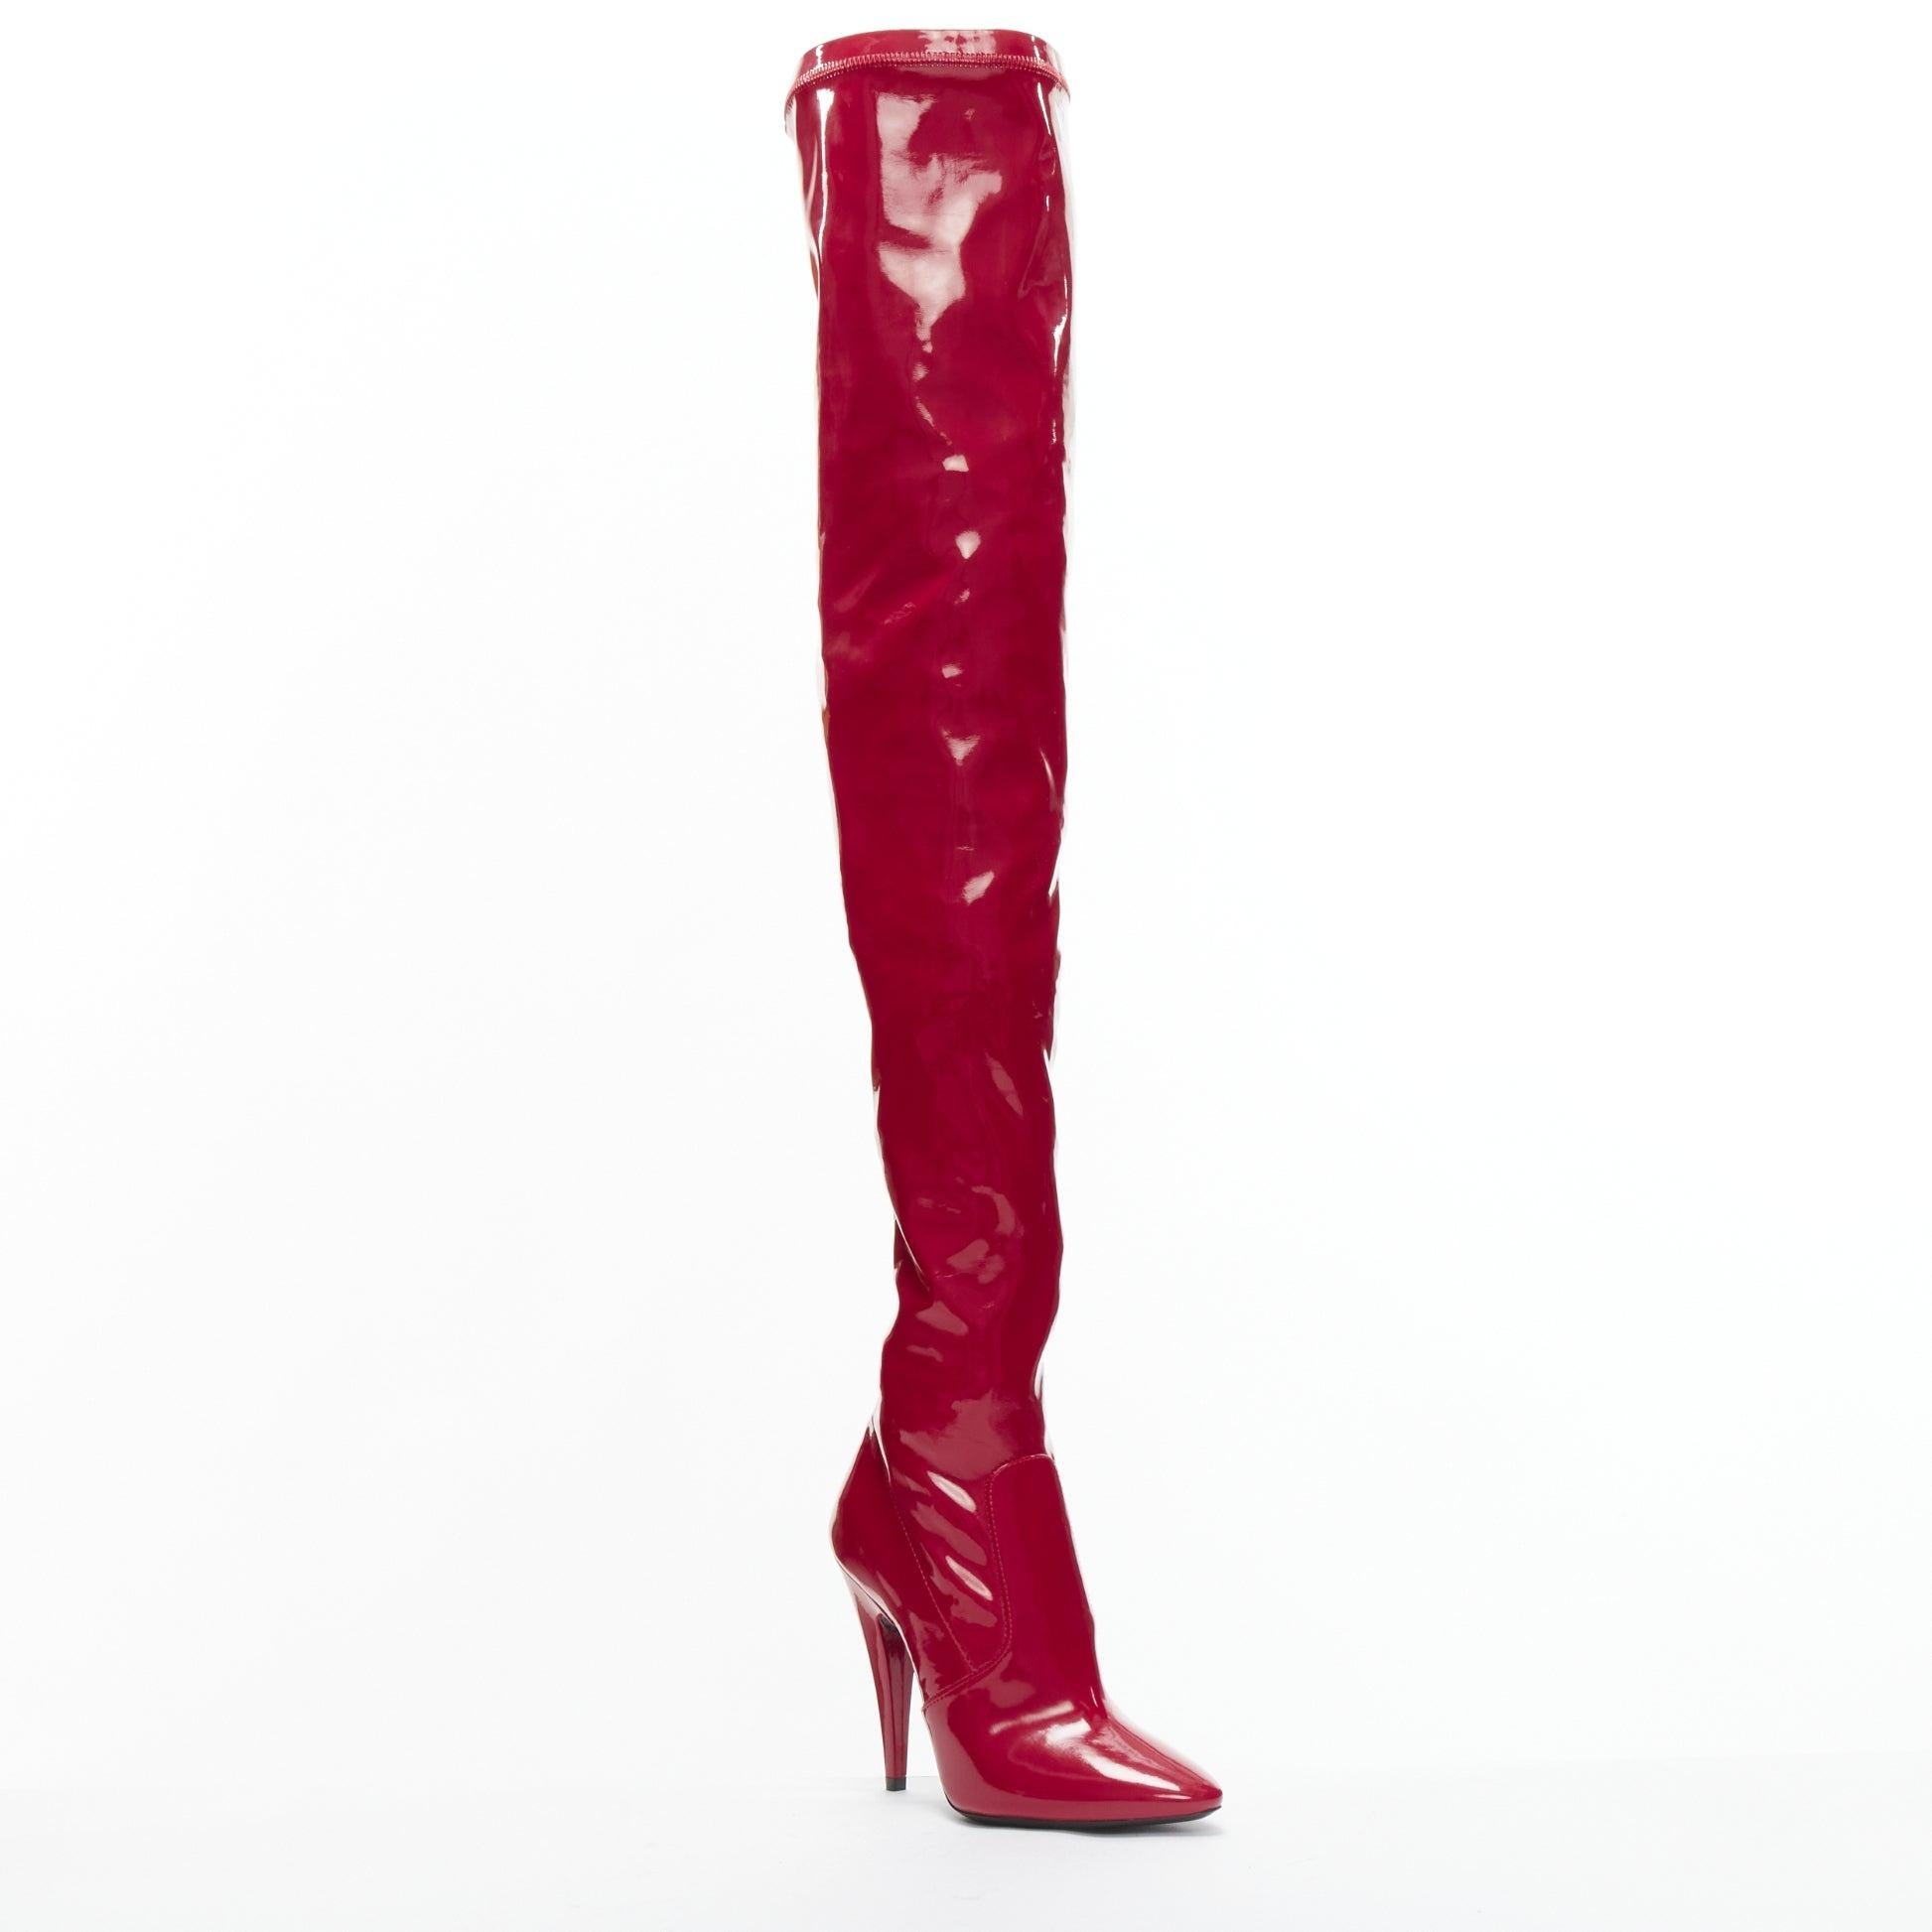 New SAINT LAURENT Aylah 110 Runway lava red vinyl thigh high boots EU37
Reference: TGAS/D00746
Brand: Saint Laurent
Designer: Anthony Vaccarello
Model: Aylah 110 7457 1LW10 6205
Collection: Fall 2020 - Runway
Material: PVC
Color: Red
Pattern: